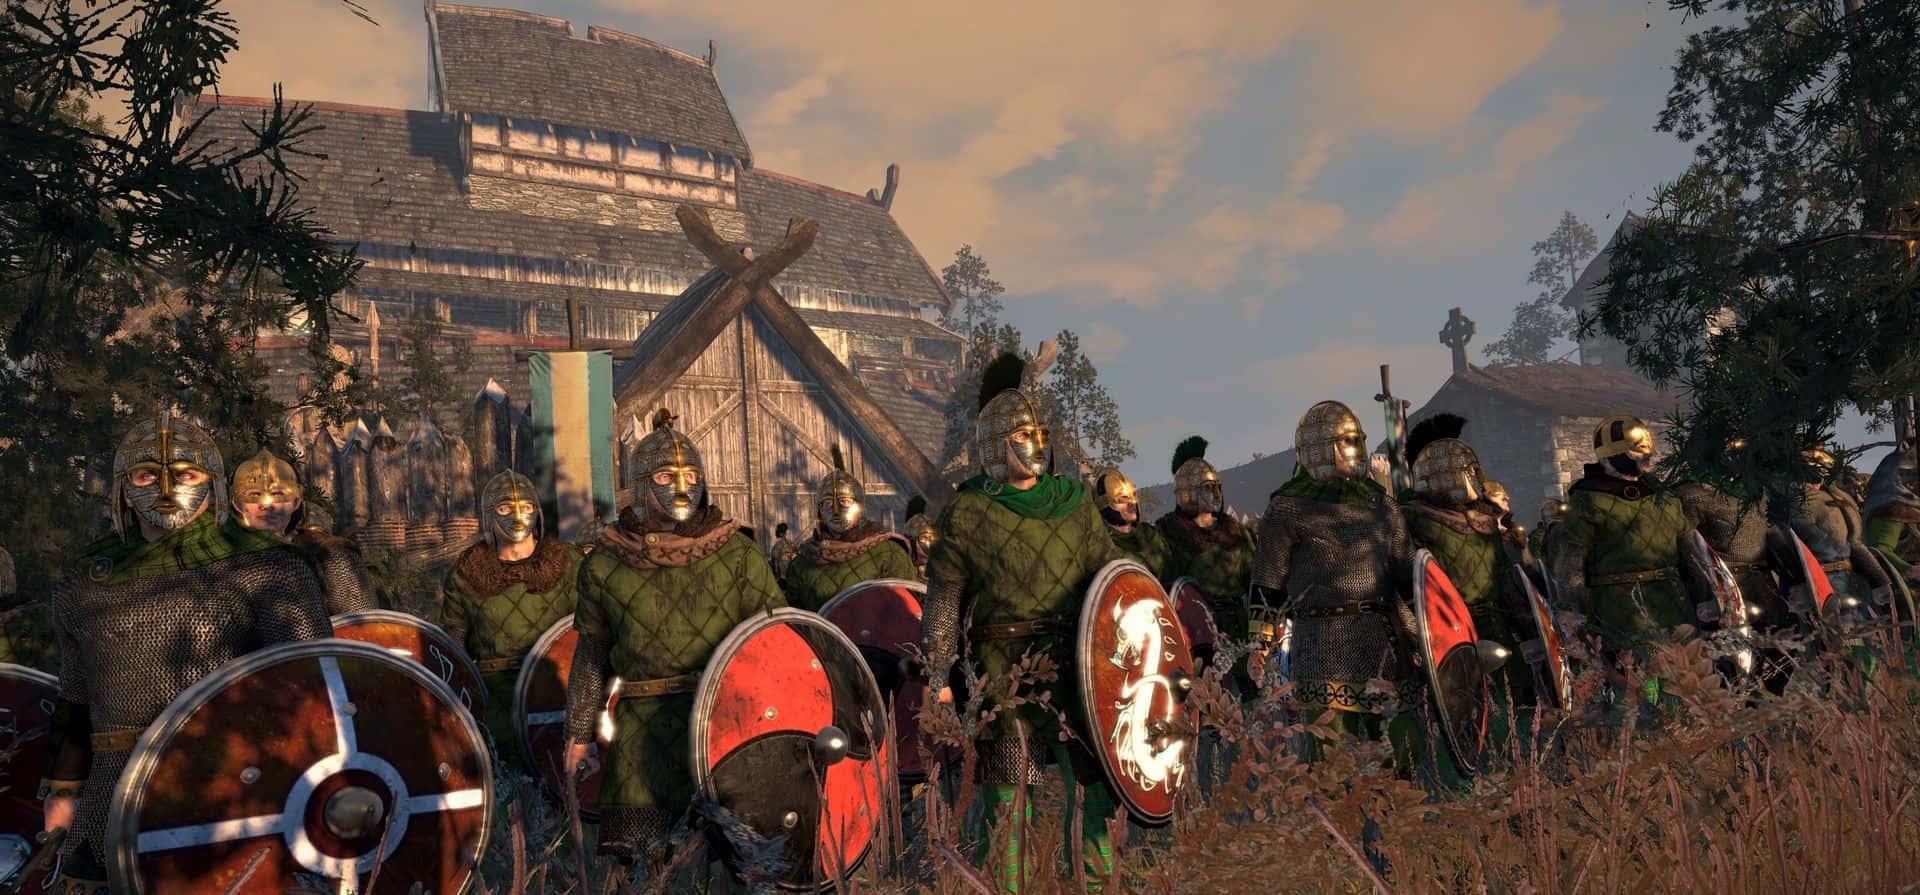 A Group Of Men In Armor Are Standing In A Field